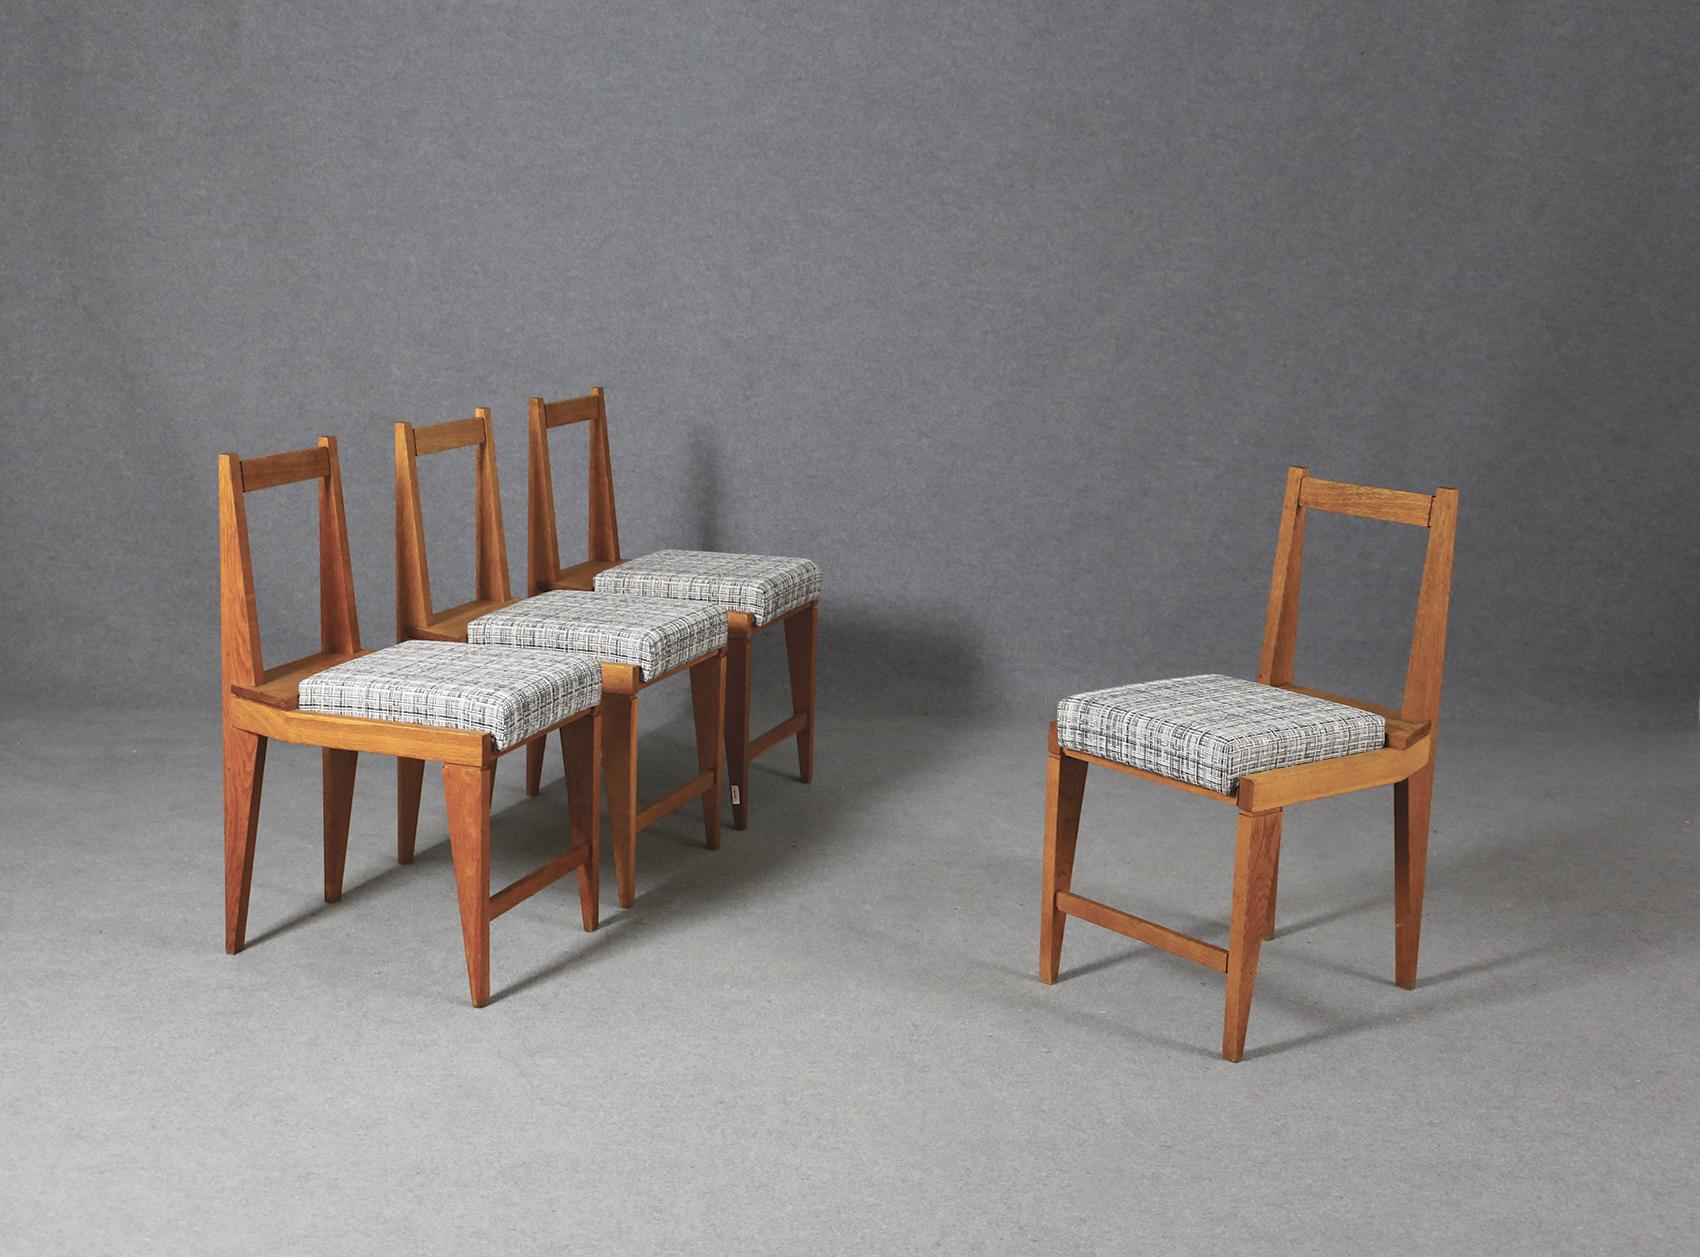 Set of four chairs by Augusto Romano years, 1950. The set of chairs is in perfect condition and are restored. The frame of each chair is in wood while the seat is in striped Italian cotton. The peculiarity of the chairs is its geometric play with